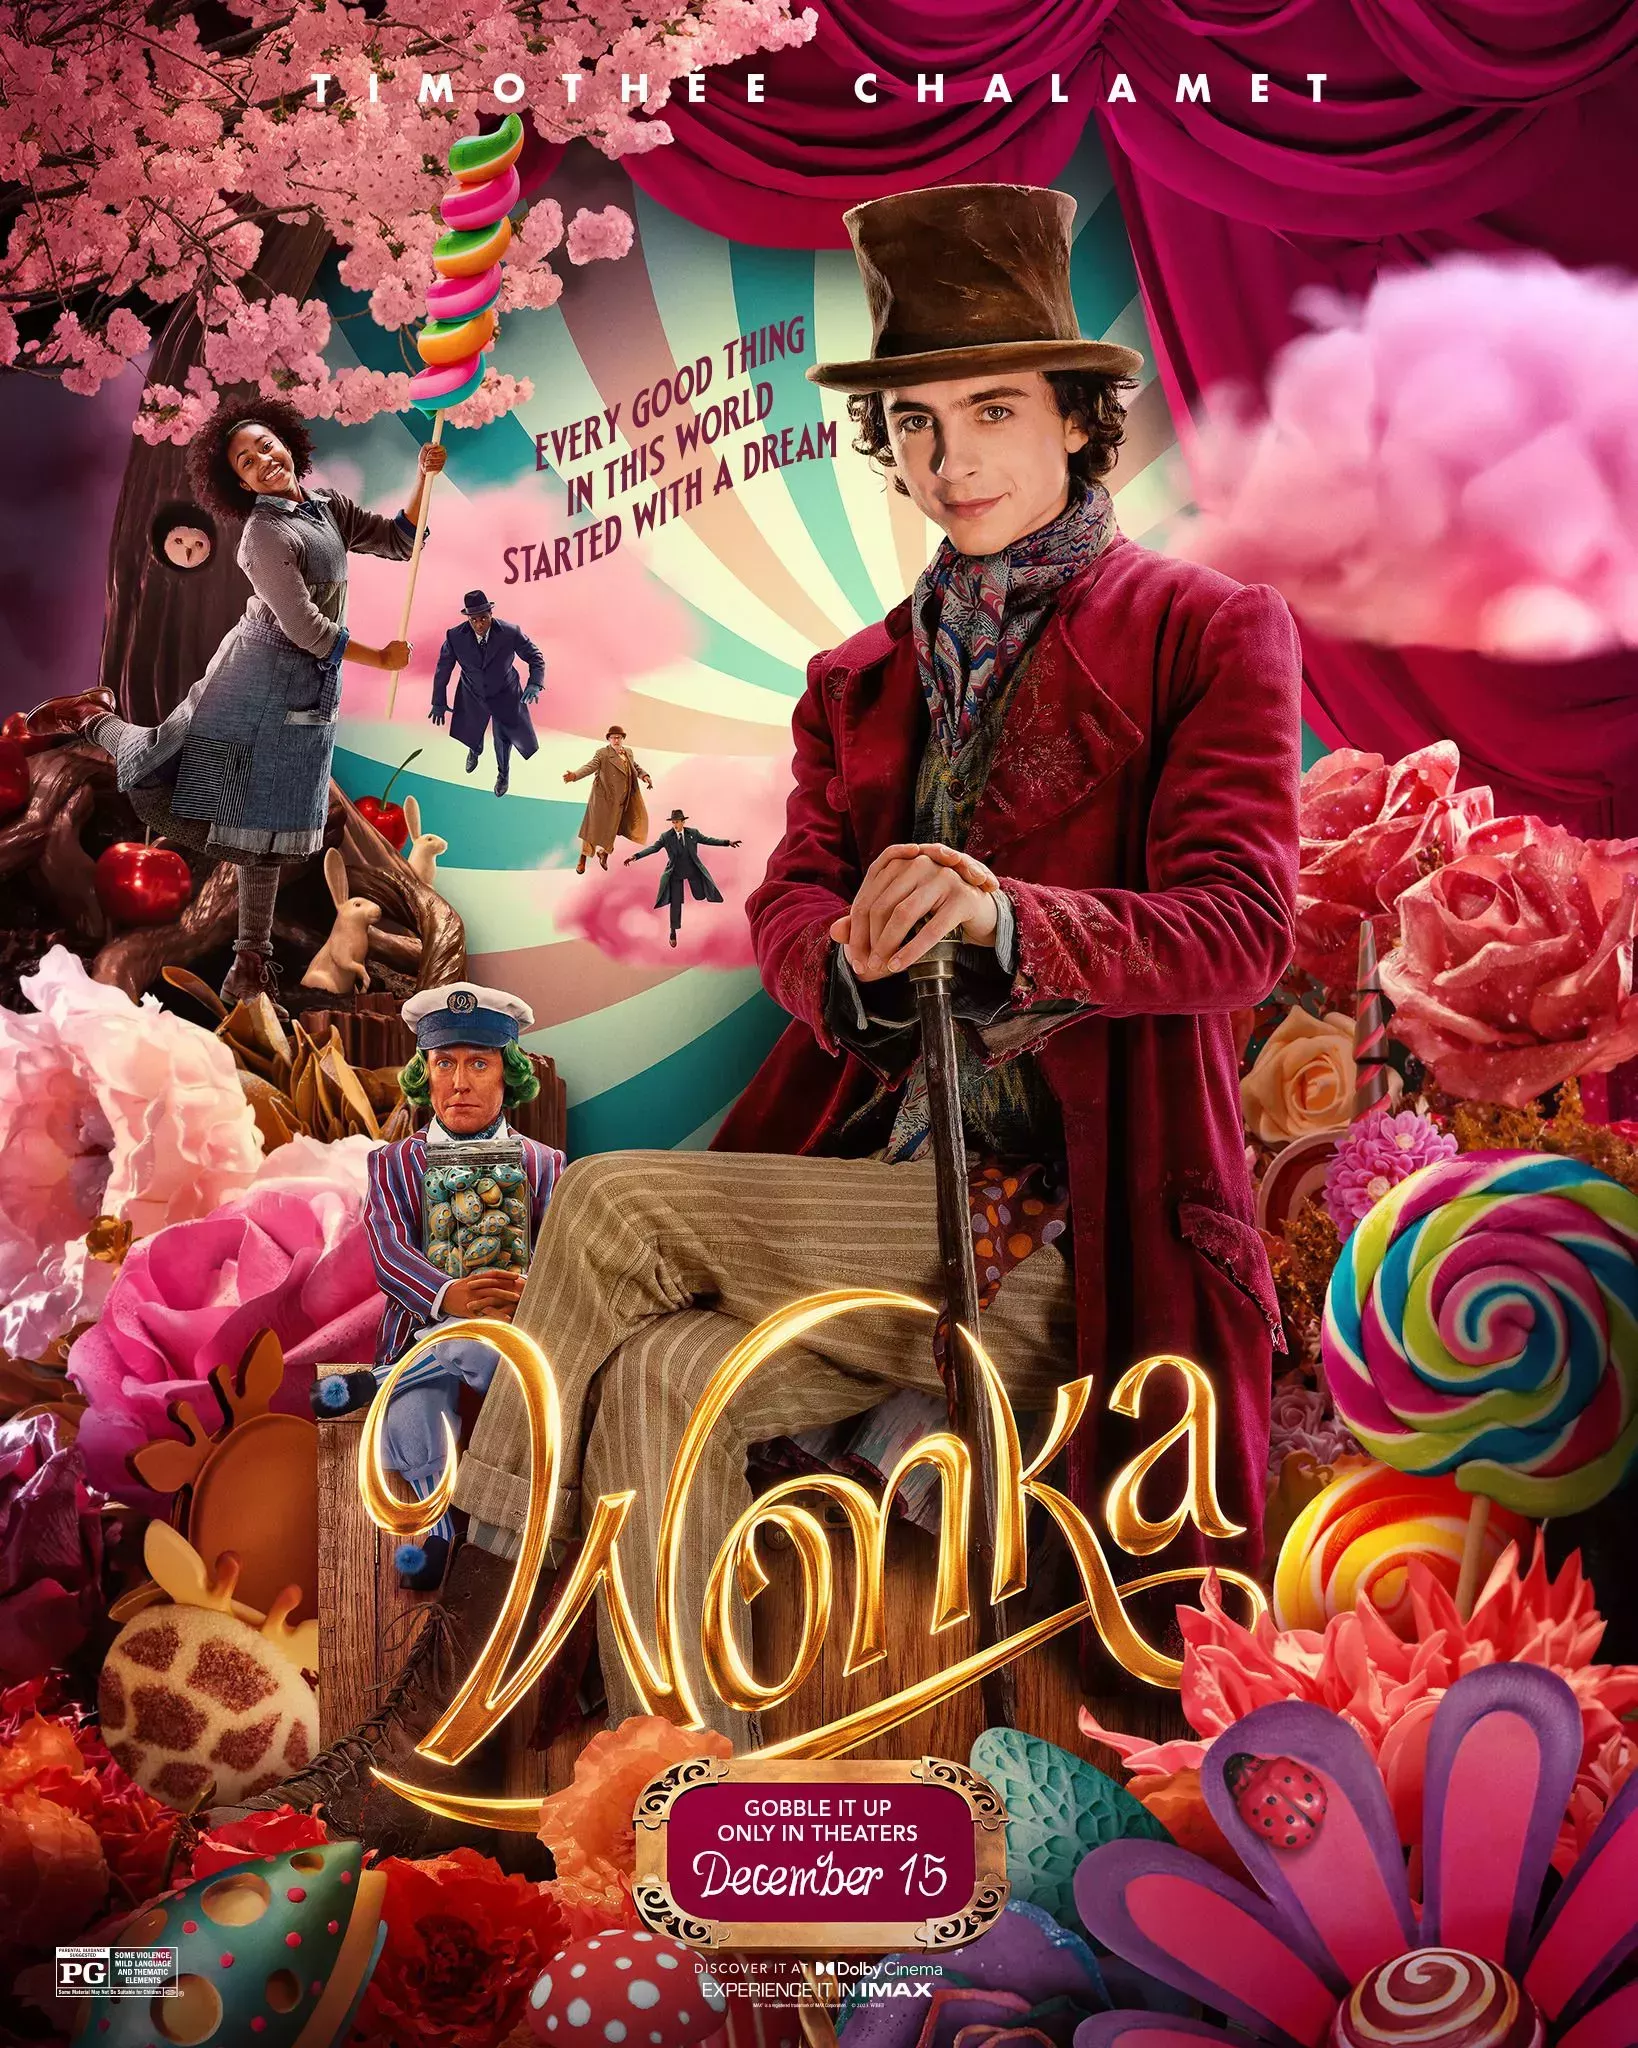 Wonka sits among all kinds of colorful giant candies and chocolate on the Wonka Film Poster